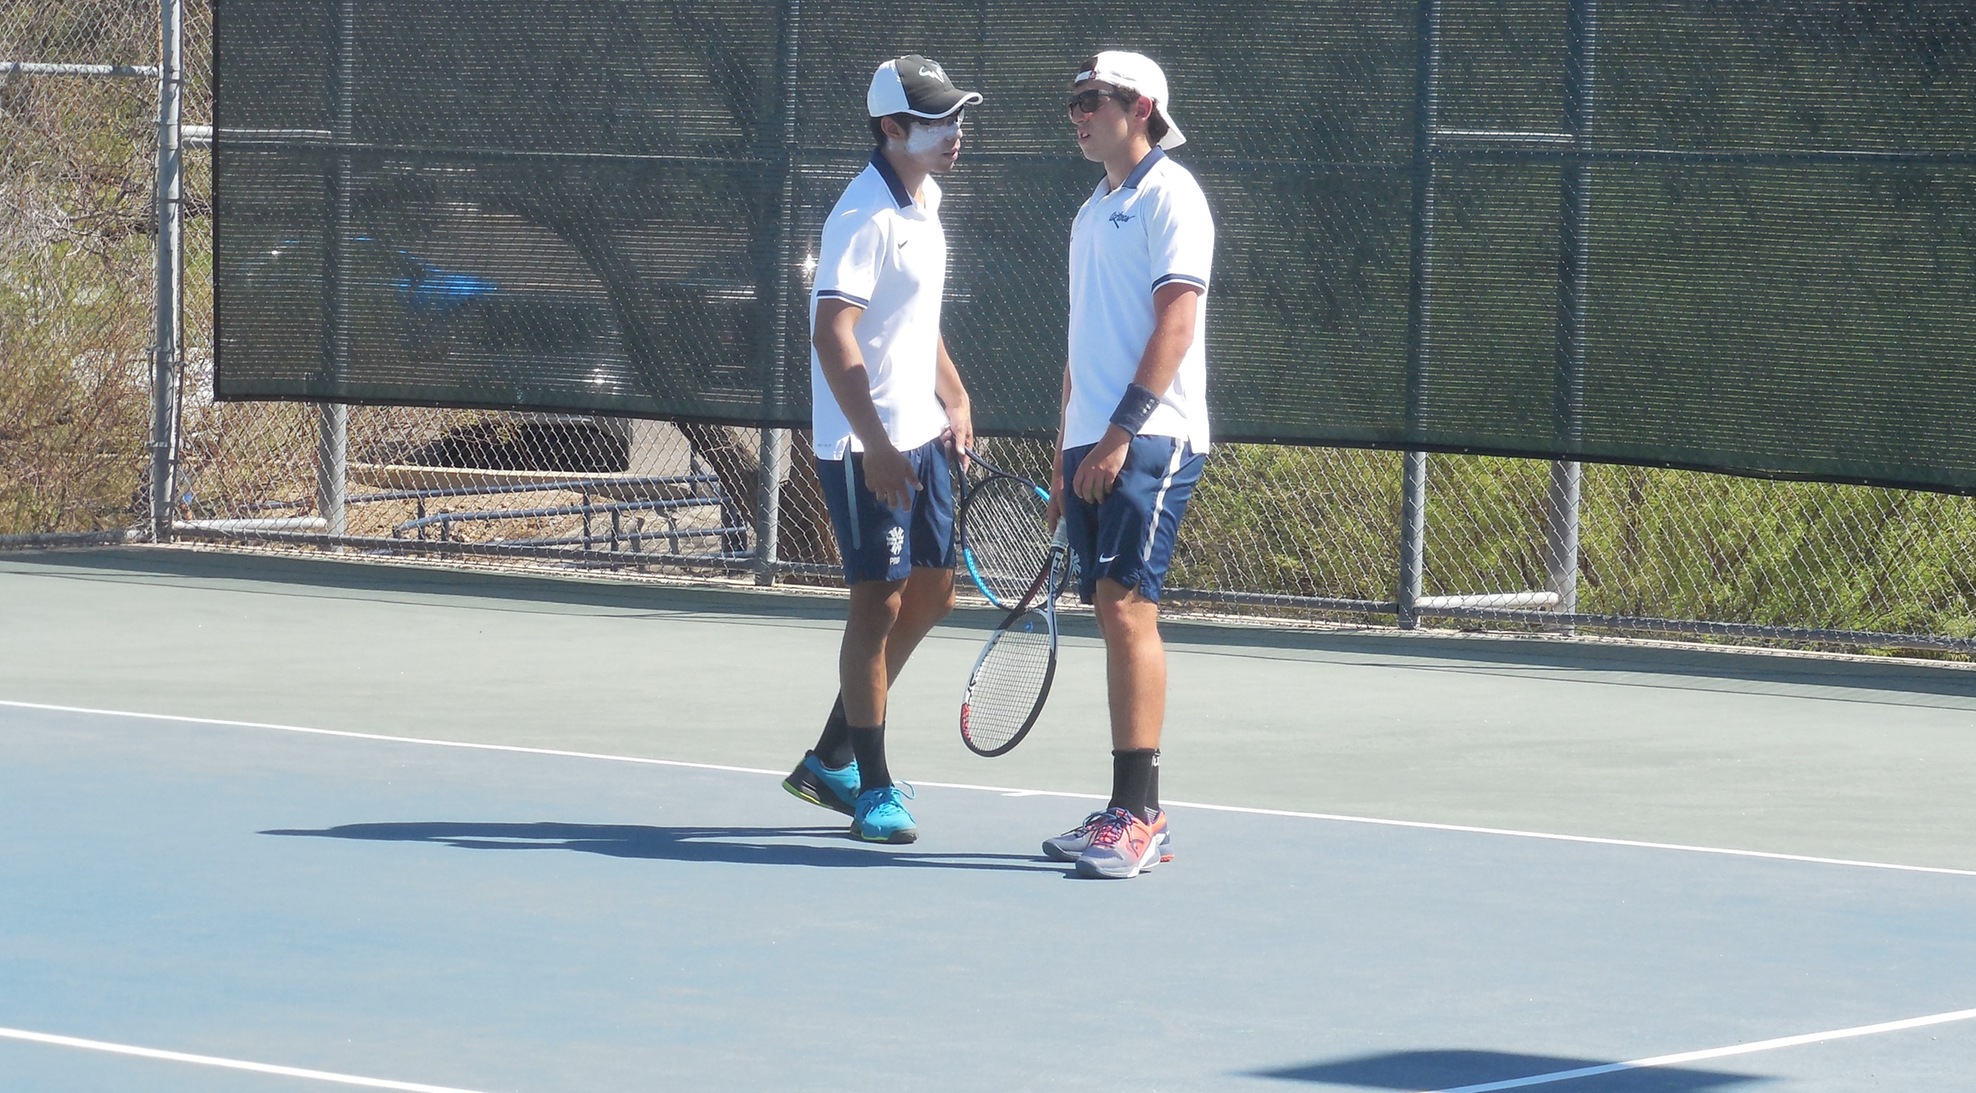 Tomothy Ou and Scott Mantelman advanced in the No. 1 doubles flight after winning a three set match 6-4, 2-6, 6-2 over Andres Graterol and Martin Zarate from Jacksonville College. Photo by Raymond Suarez